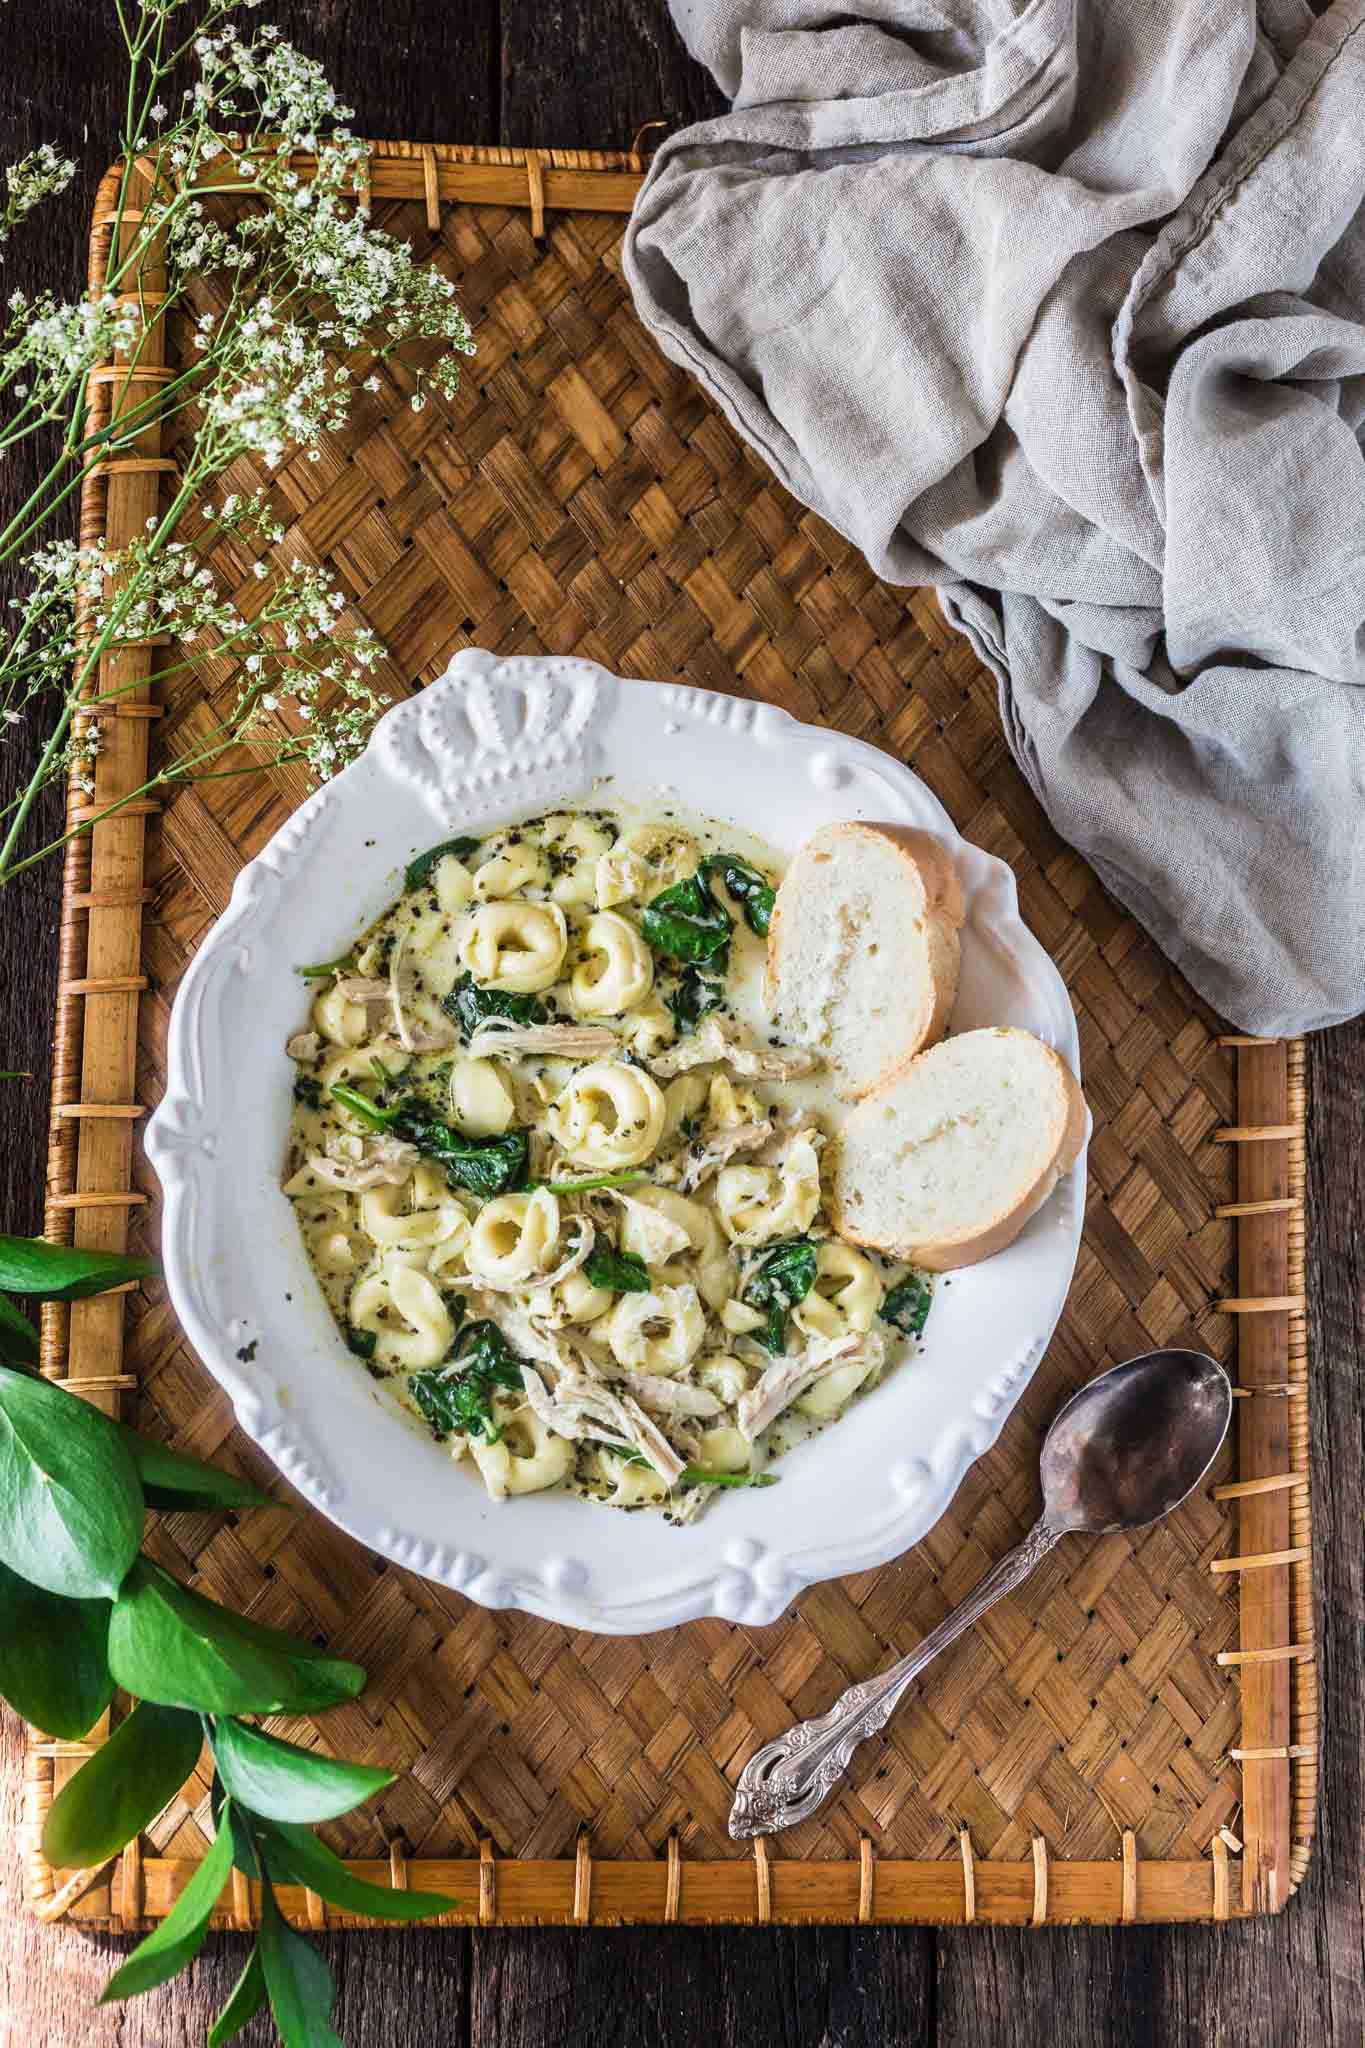 Creamy Chicken Tortellini Soup | www.oliviascuisine.com | You won't believe how easy this Creamy Chicken Tortellini Soup is! Hearty, comforting and made in the slow cooker. It really doesn't get easier than that!